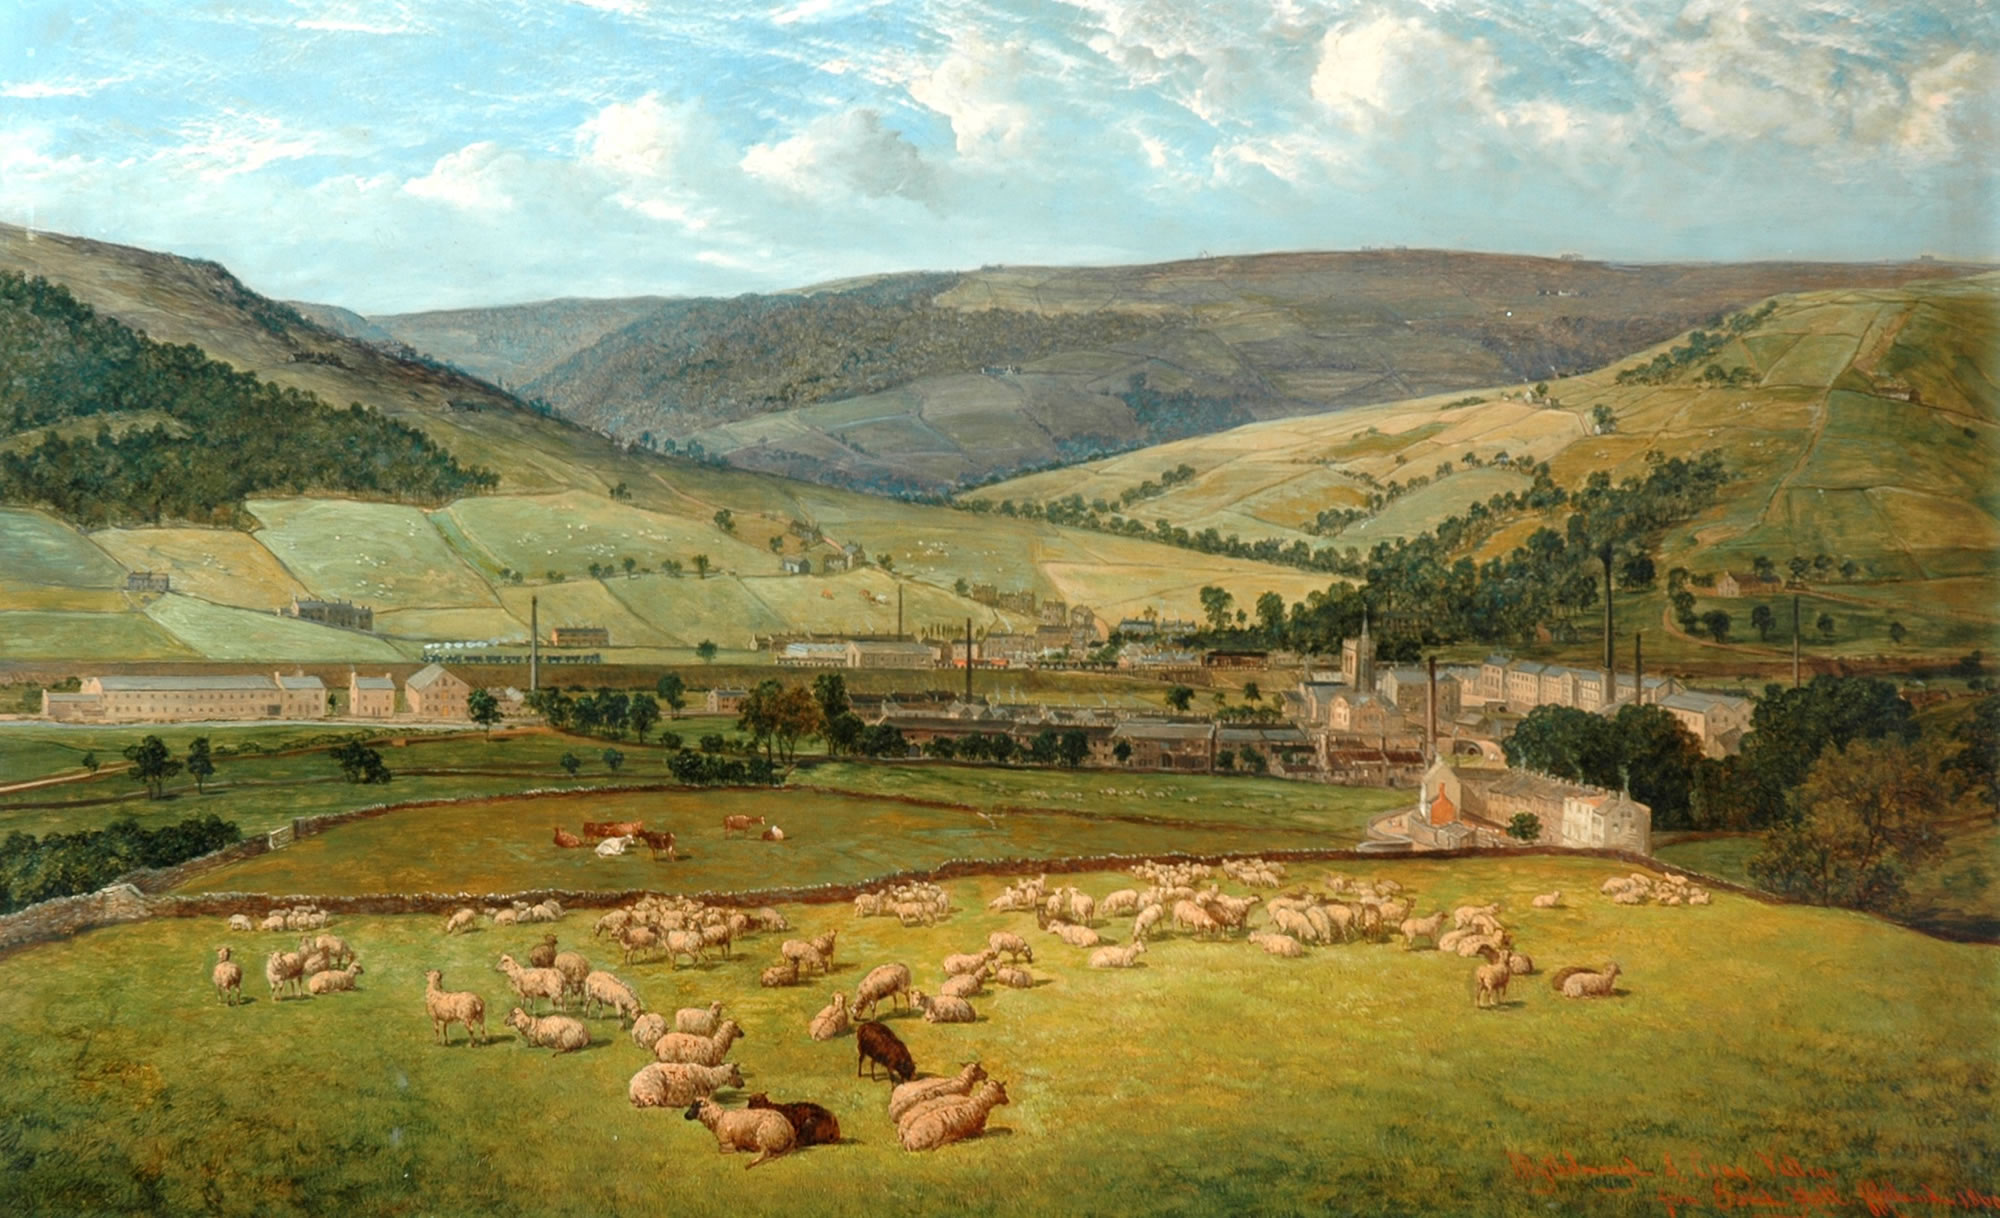 Image name calderdale mytholmroyd amd cragg valley from ewood hall john holland 1869 the 1 image from the post We are West Yorkshire in Yorkshire.com.